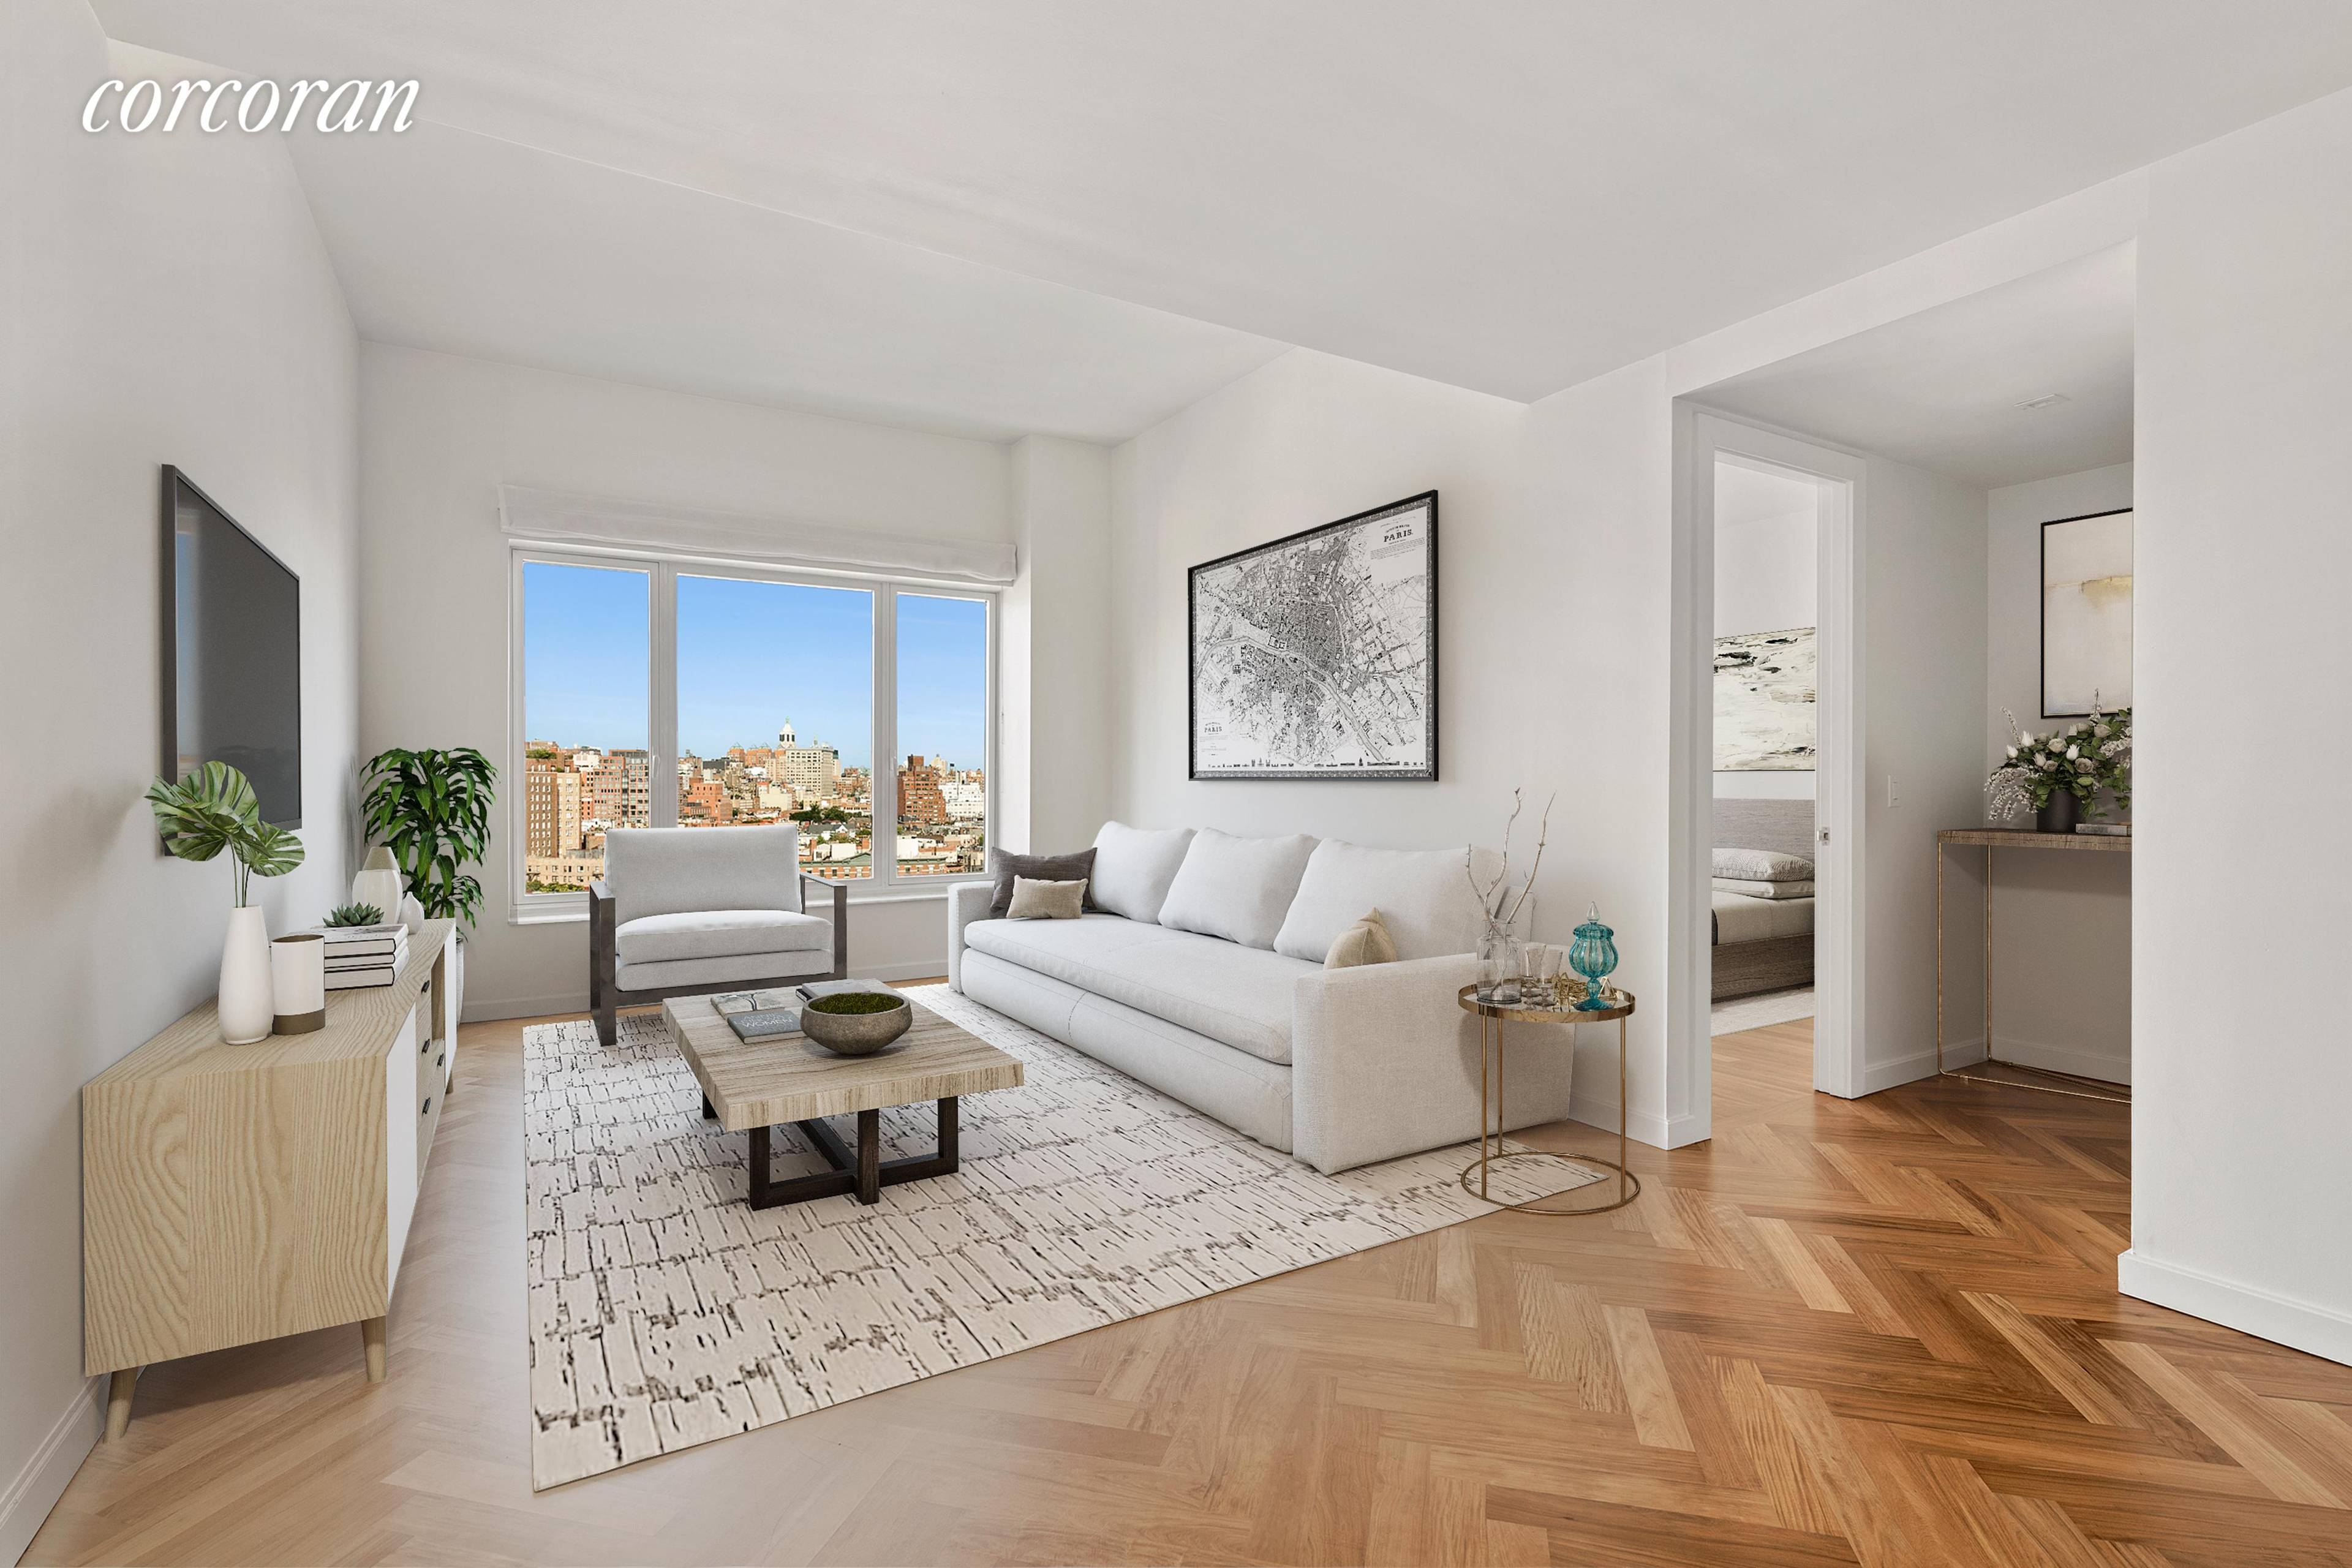 Located in one on the most iconic buildings in the West Village, this high floor one bedroom apartment has incredible, unobstructed views of the Empire State Building and the West ...